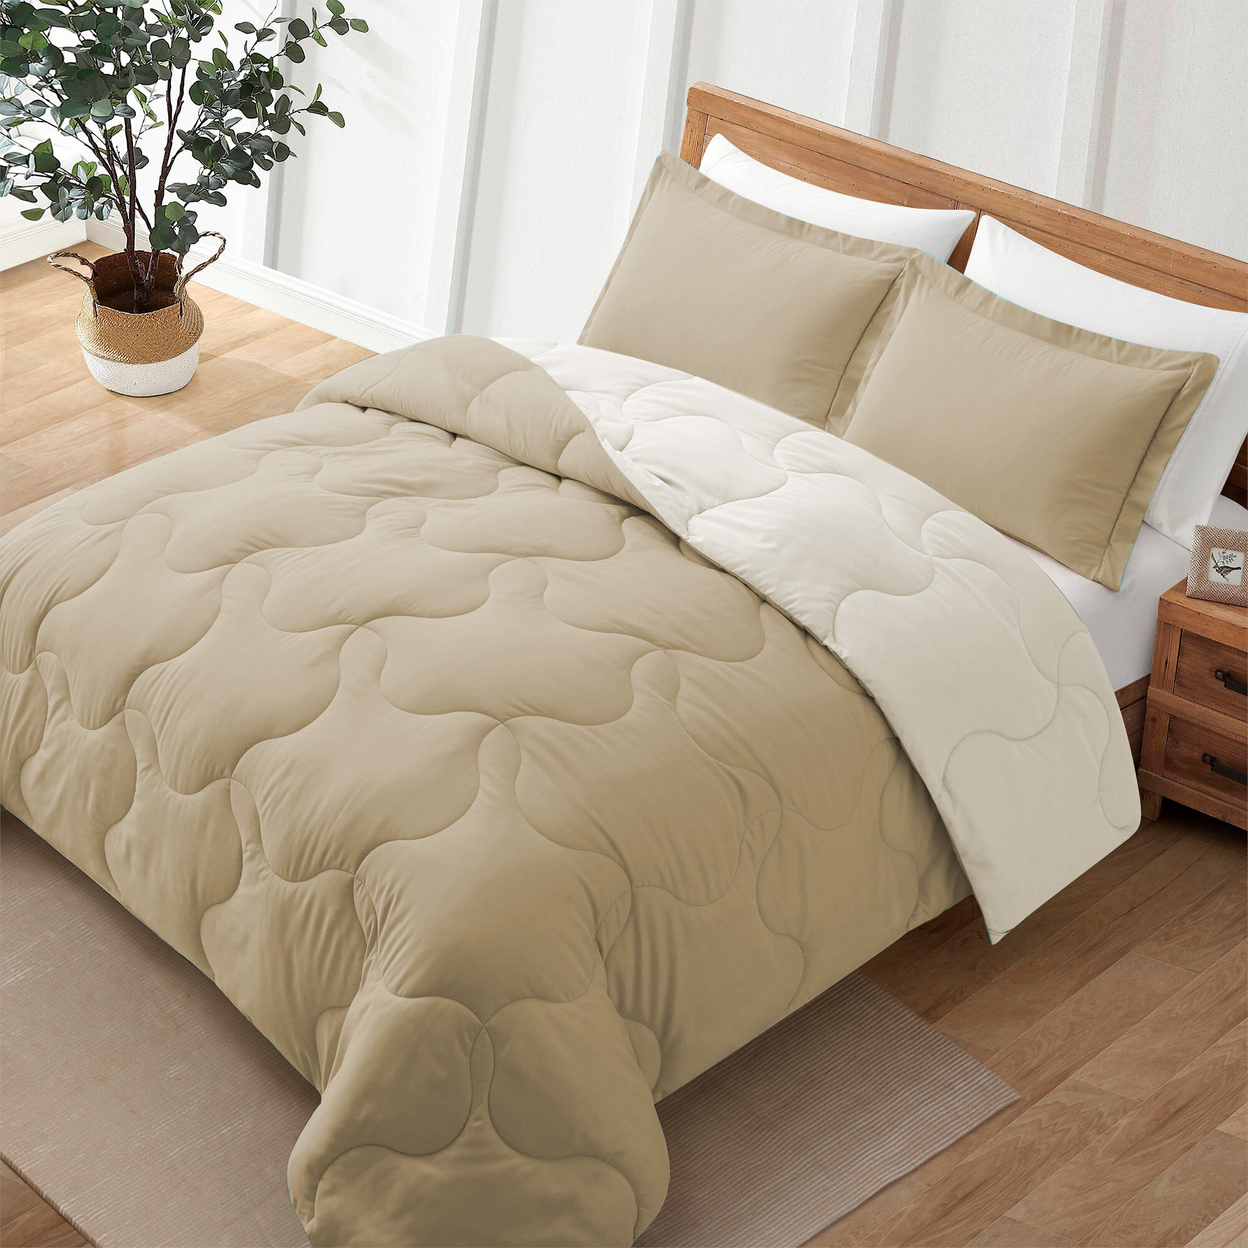 3 Or 2 Pieces Lightweight Reversible Comforter Set With Pillow Shams - Khaki/Ivory, King